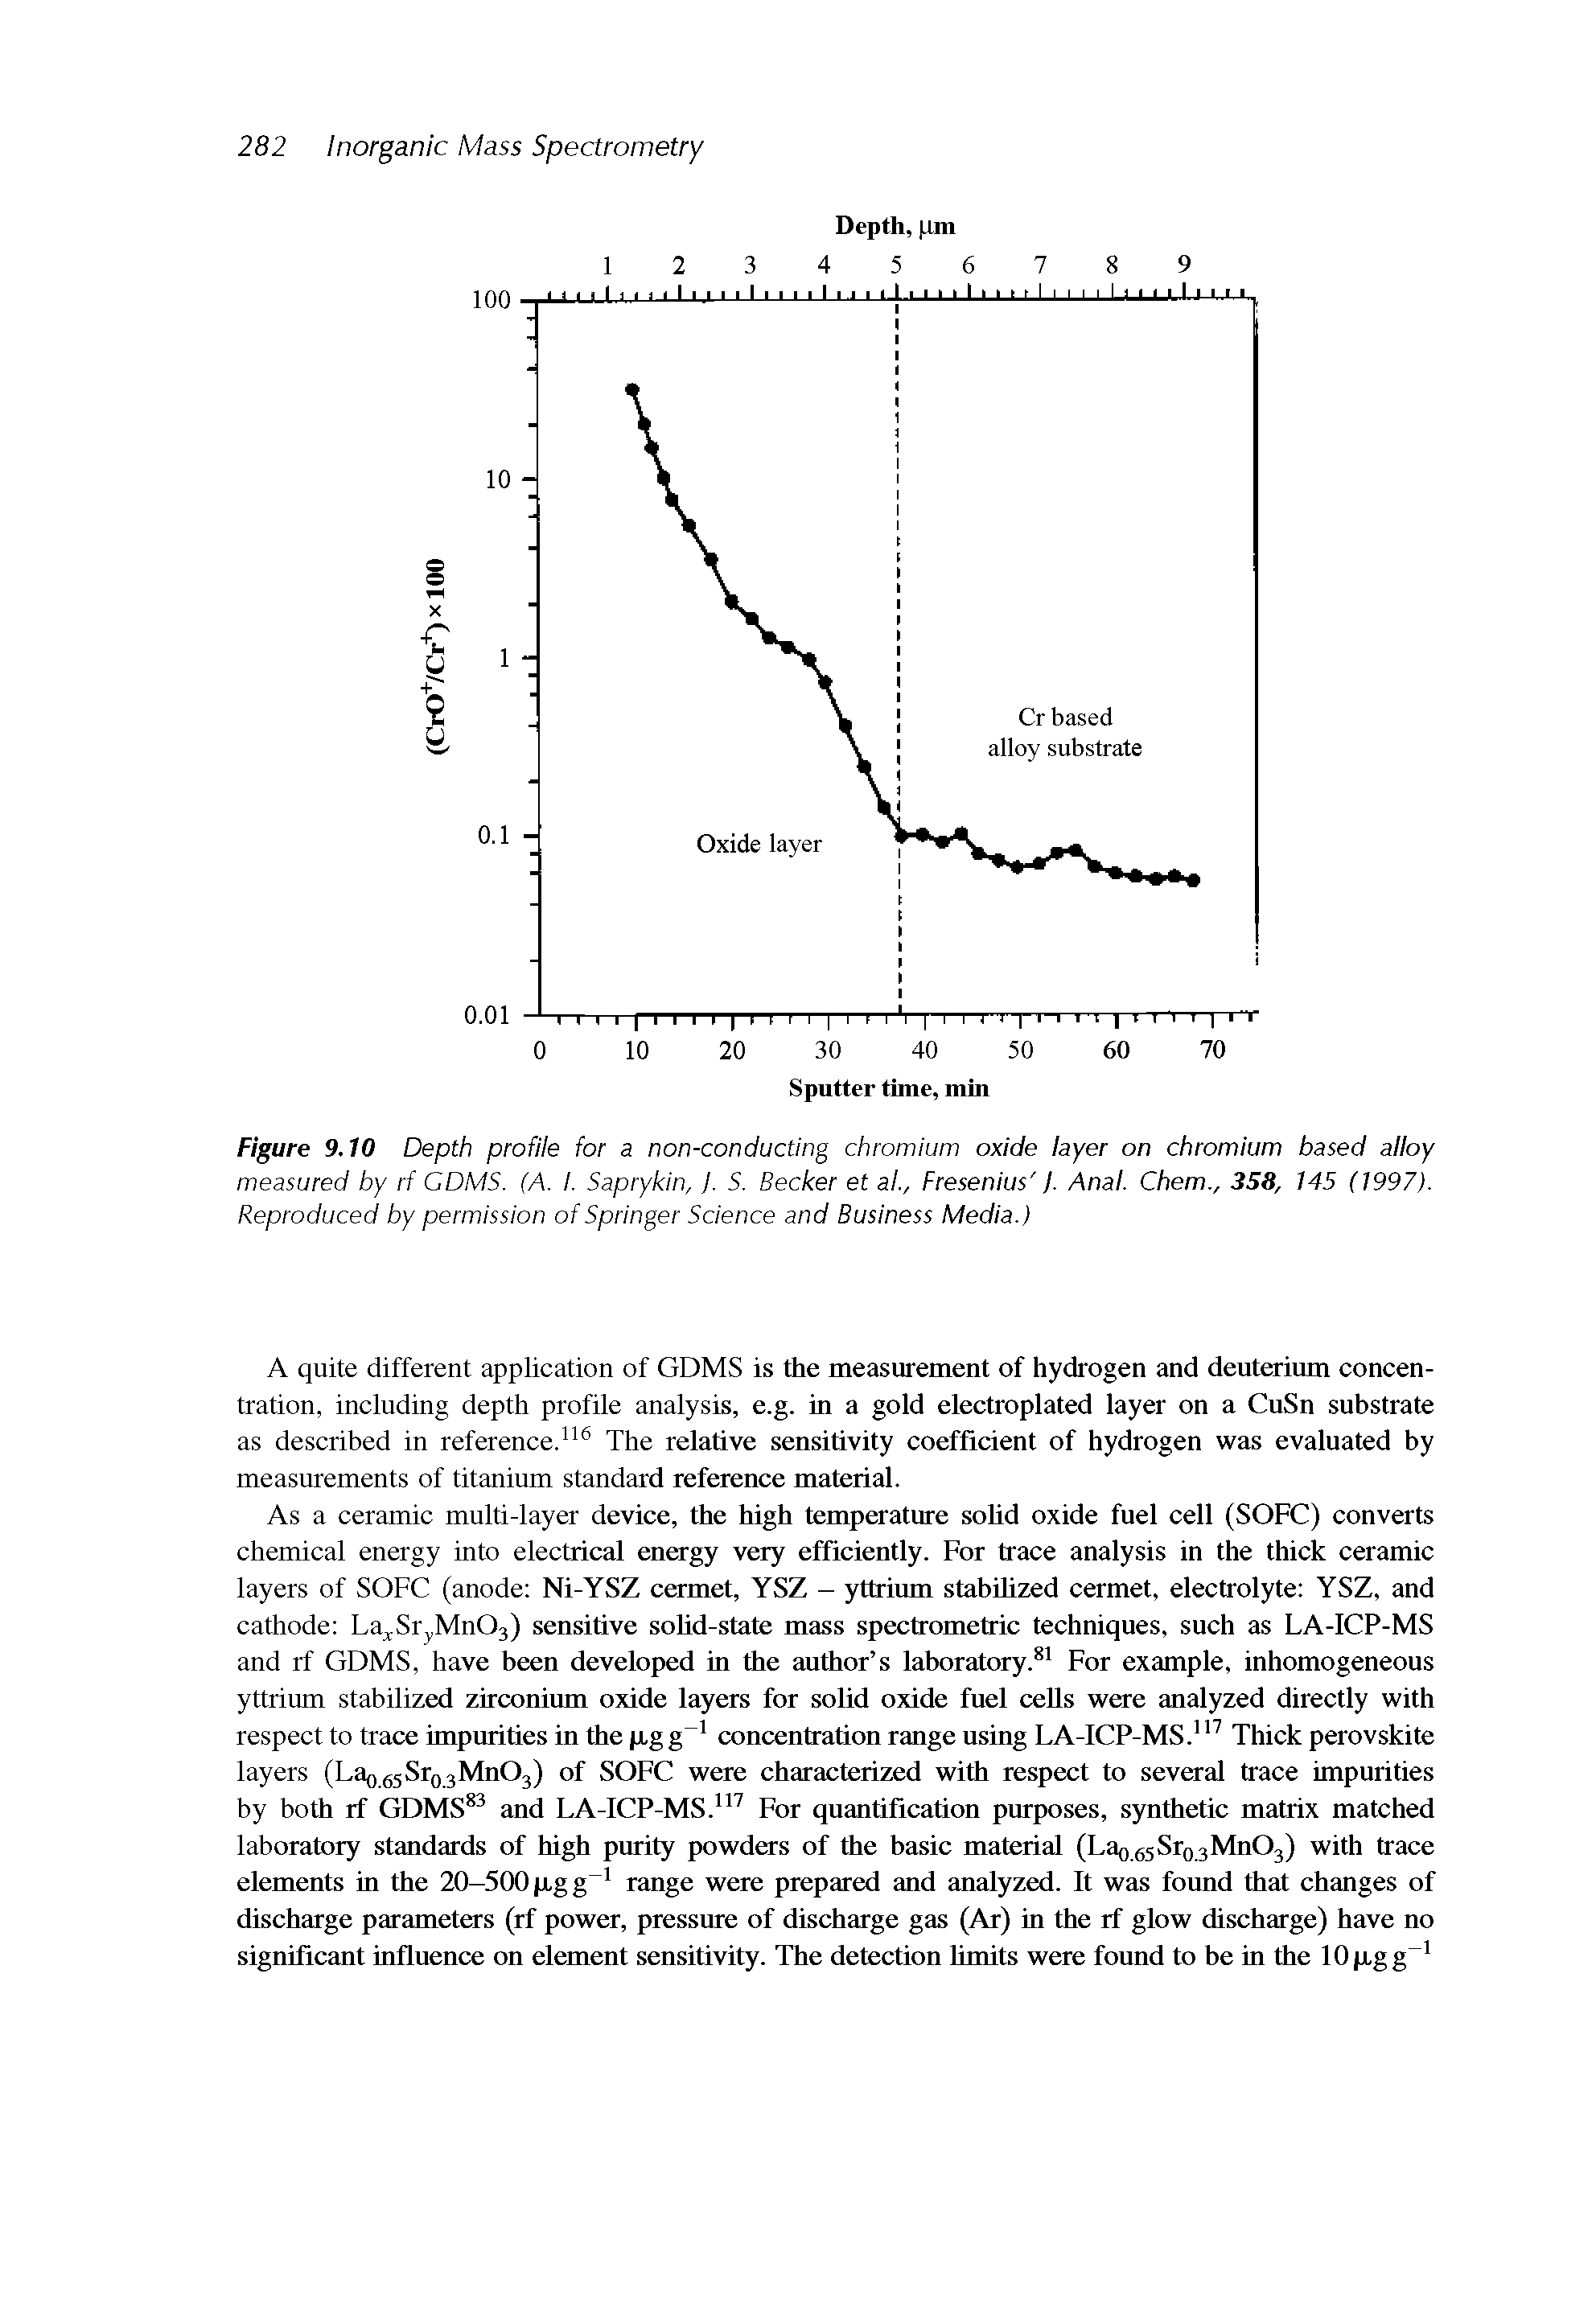 Figure 9.10 Depth profile for a non-conducting chromium oxide layer on chromium based alloy measured by rf CDMS. (A. I. Saprykin, J. S. Becker et ai, Fresenius /. Anal. Chem., 358, 145 (1997). Reproduced by permission of Springer Science and Business Media.)...